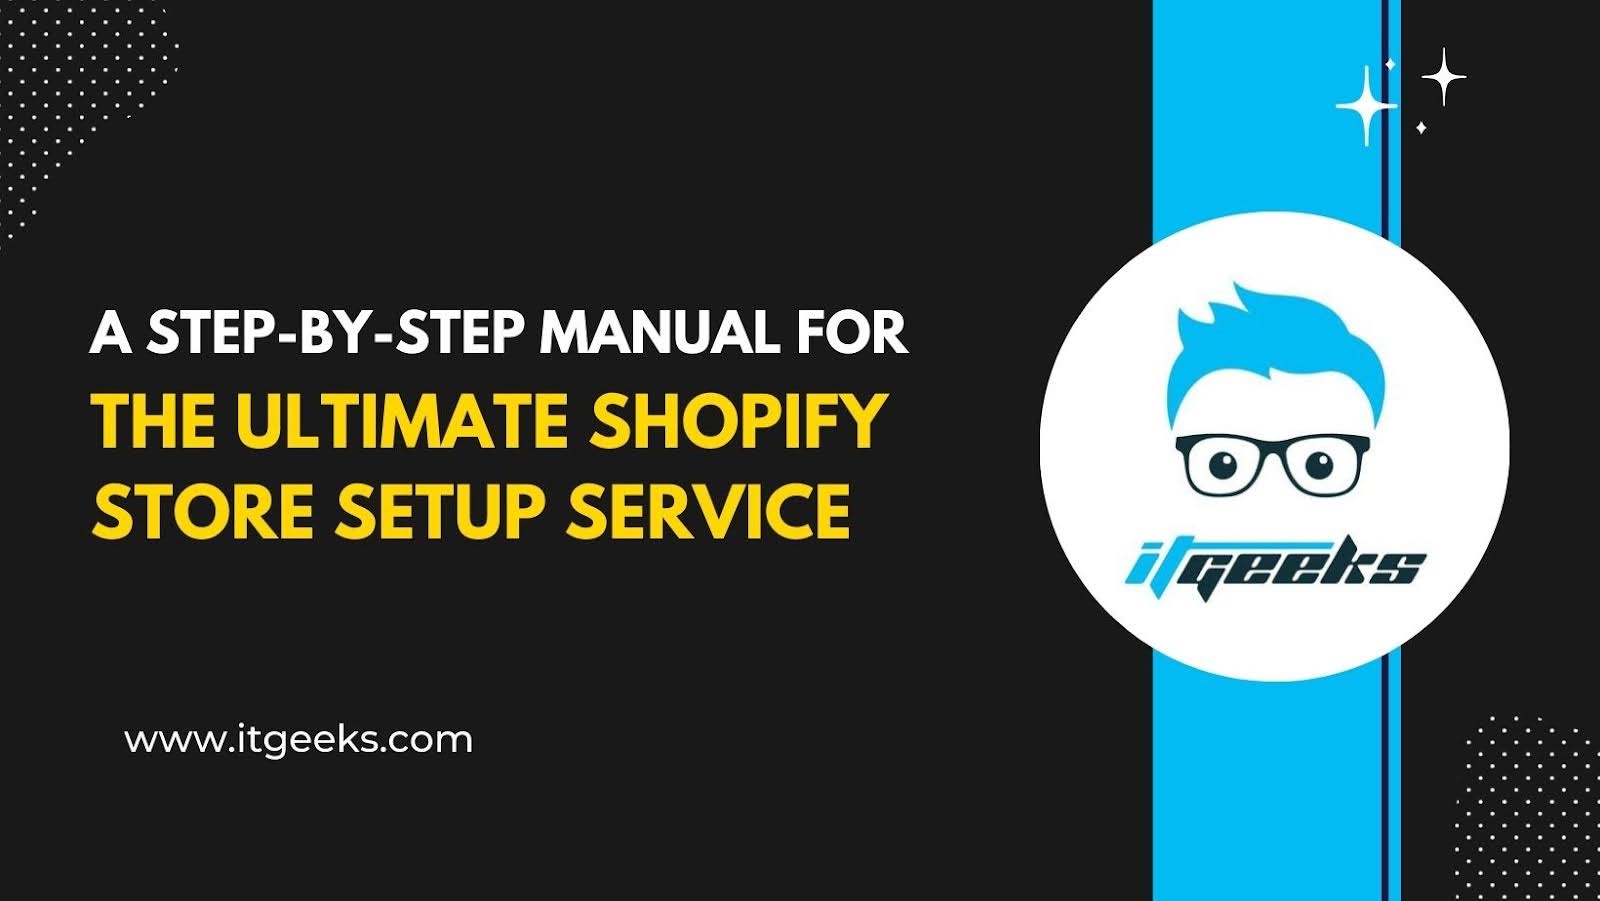 A Step-by-Step Manual for the Ultimate shopify store setup service